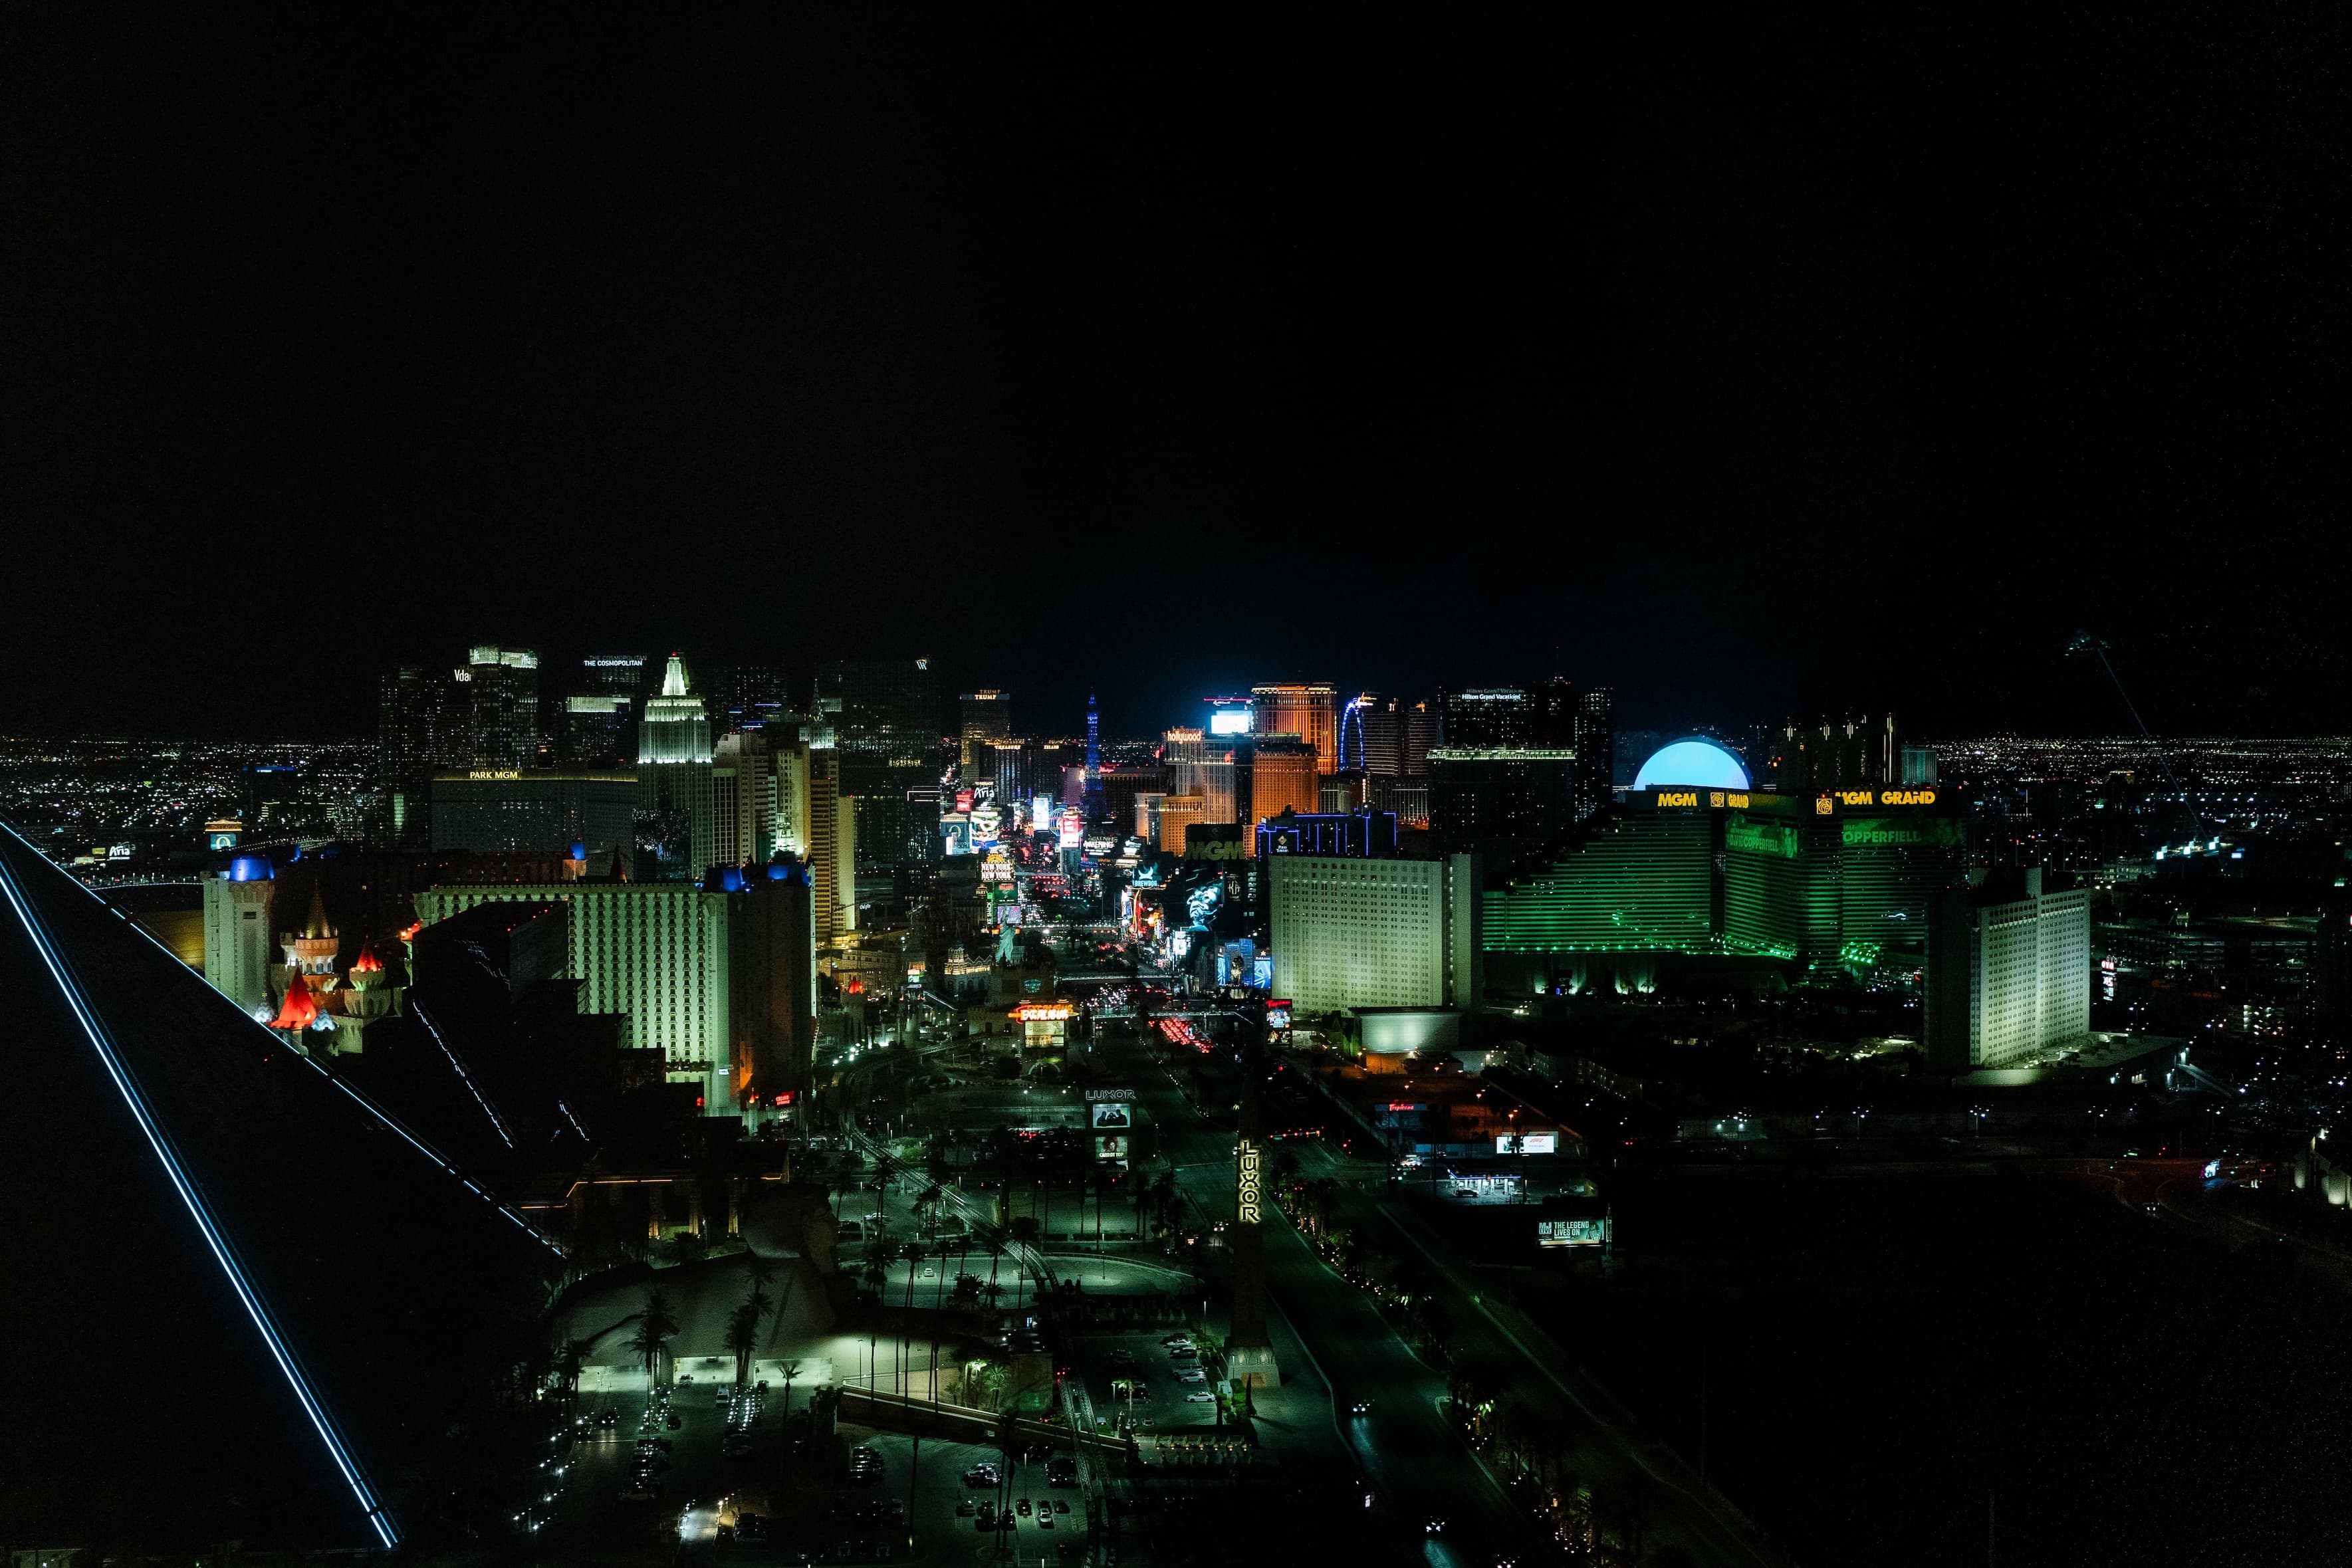 A nighttime view of the Las Vegas Strip, illuminated by the lights of famous hotels and casinos, with a clear view of the city's vibrant life and attractions.